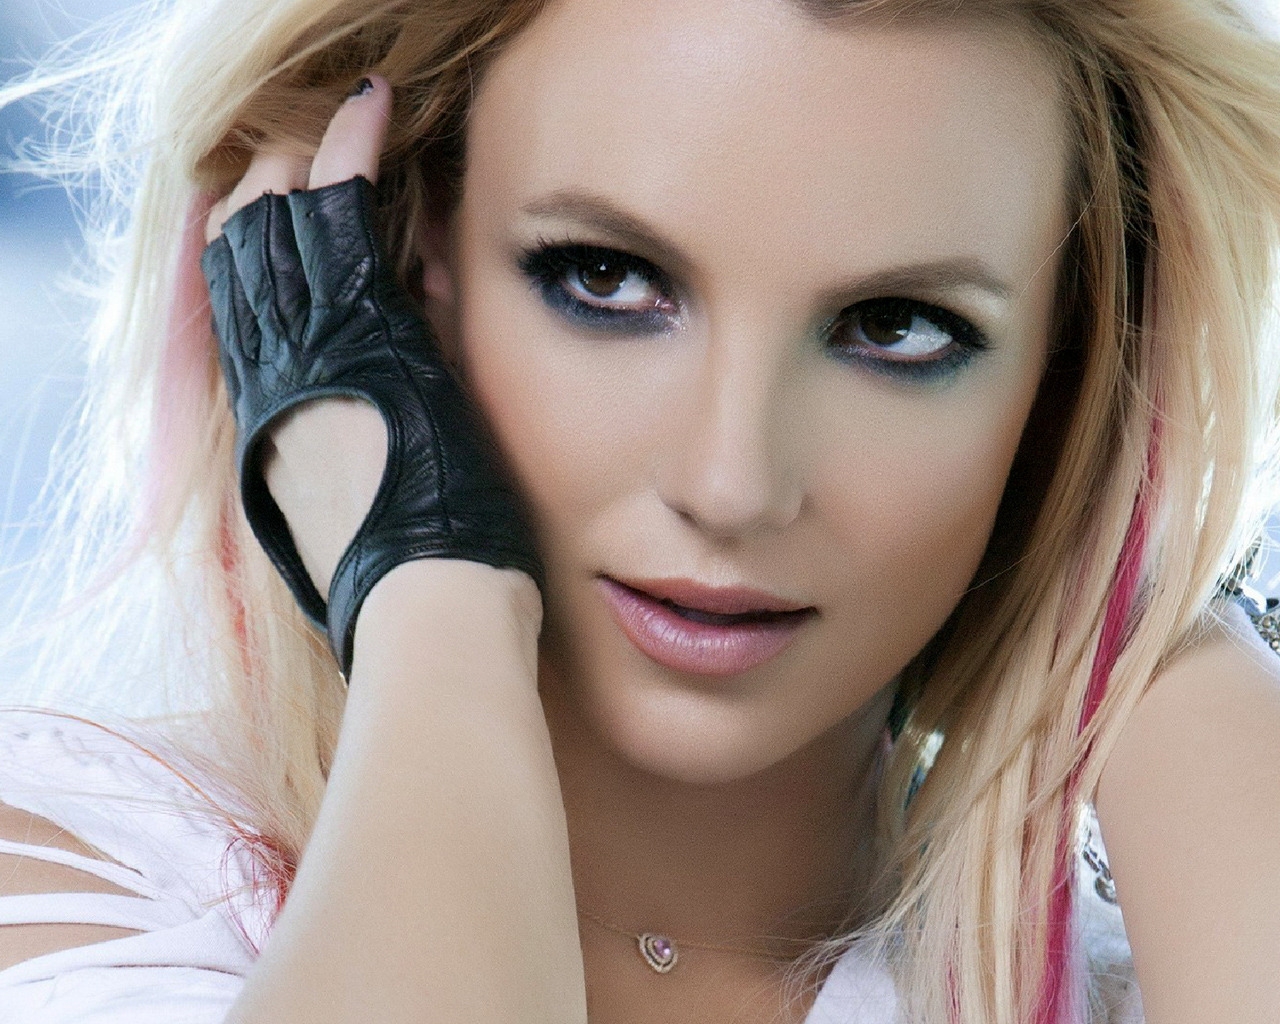 Britney Spears for 1280 x 1024 resolution